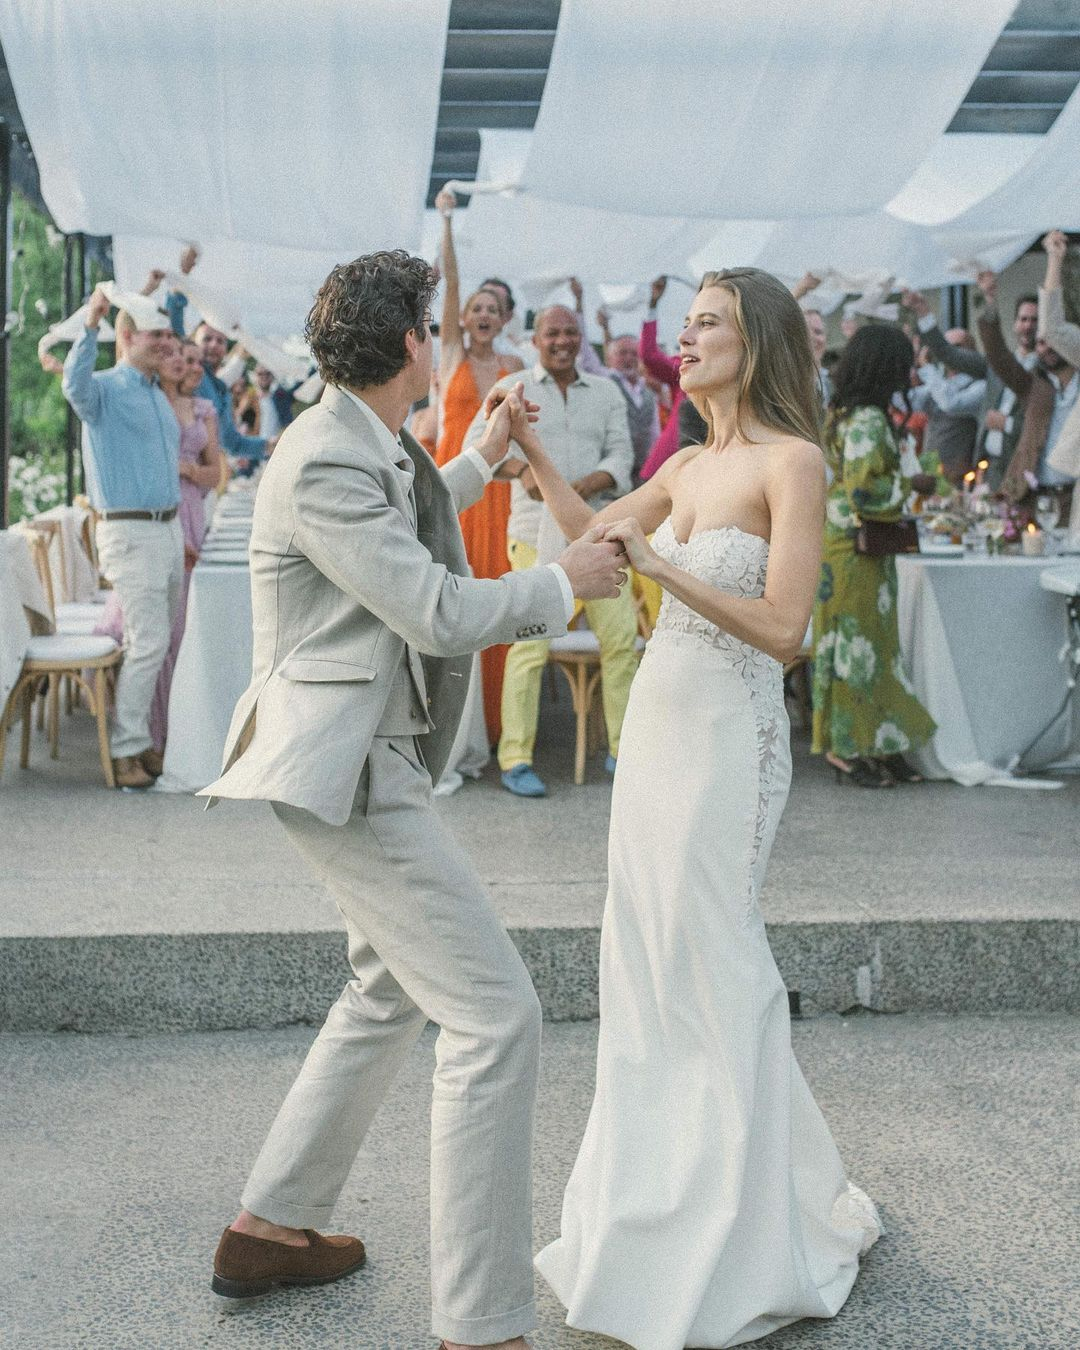 Should You Have a Wedding After Party?